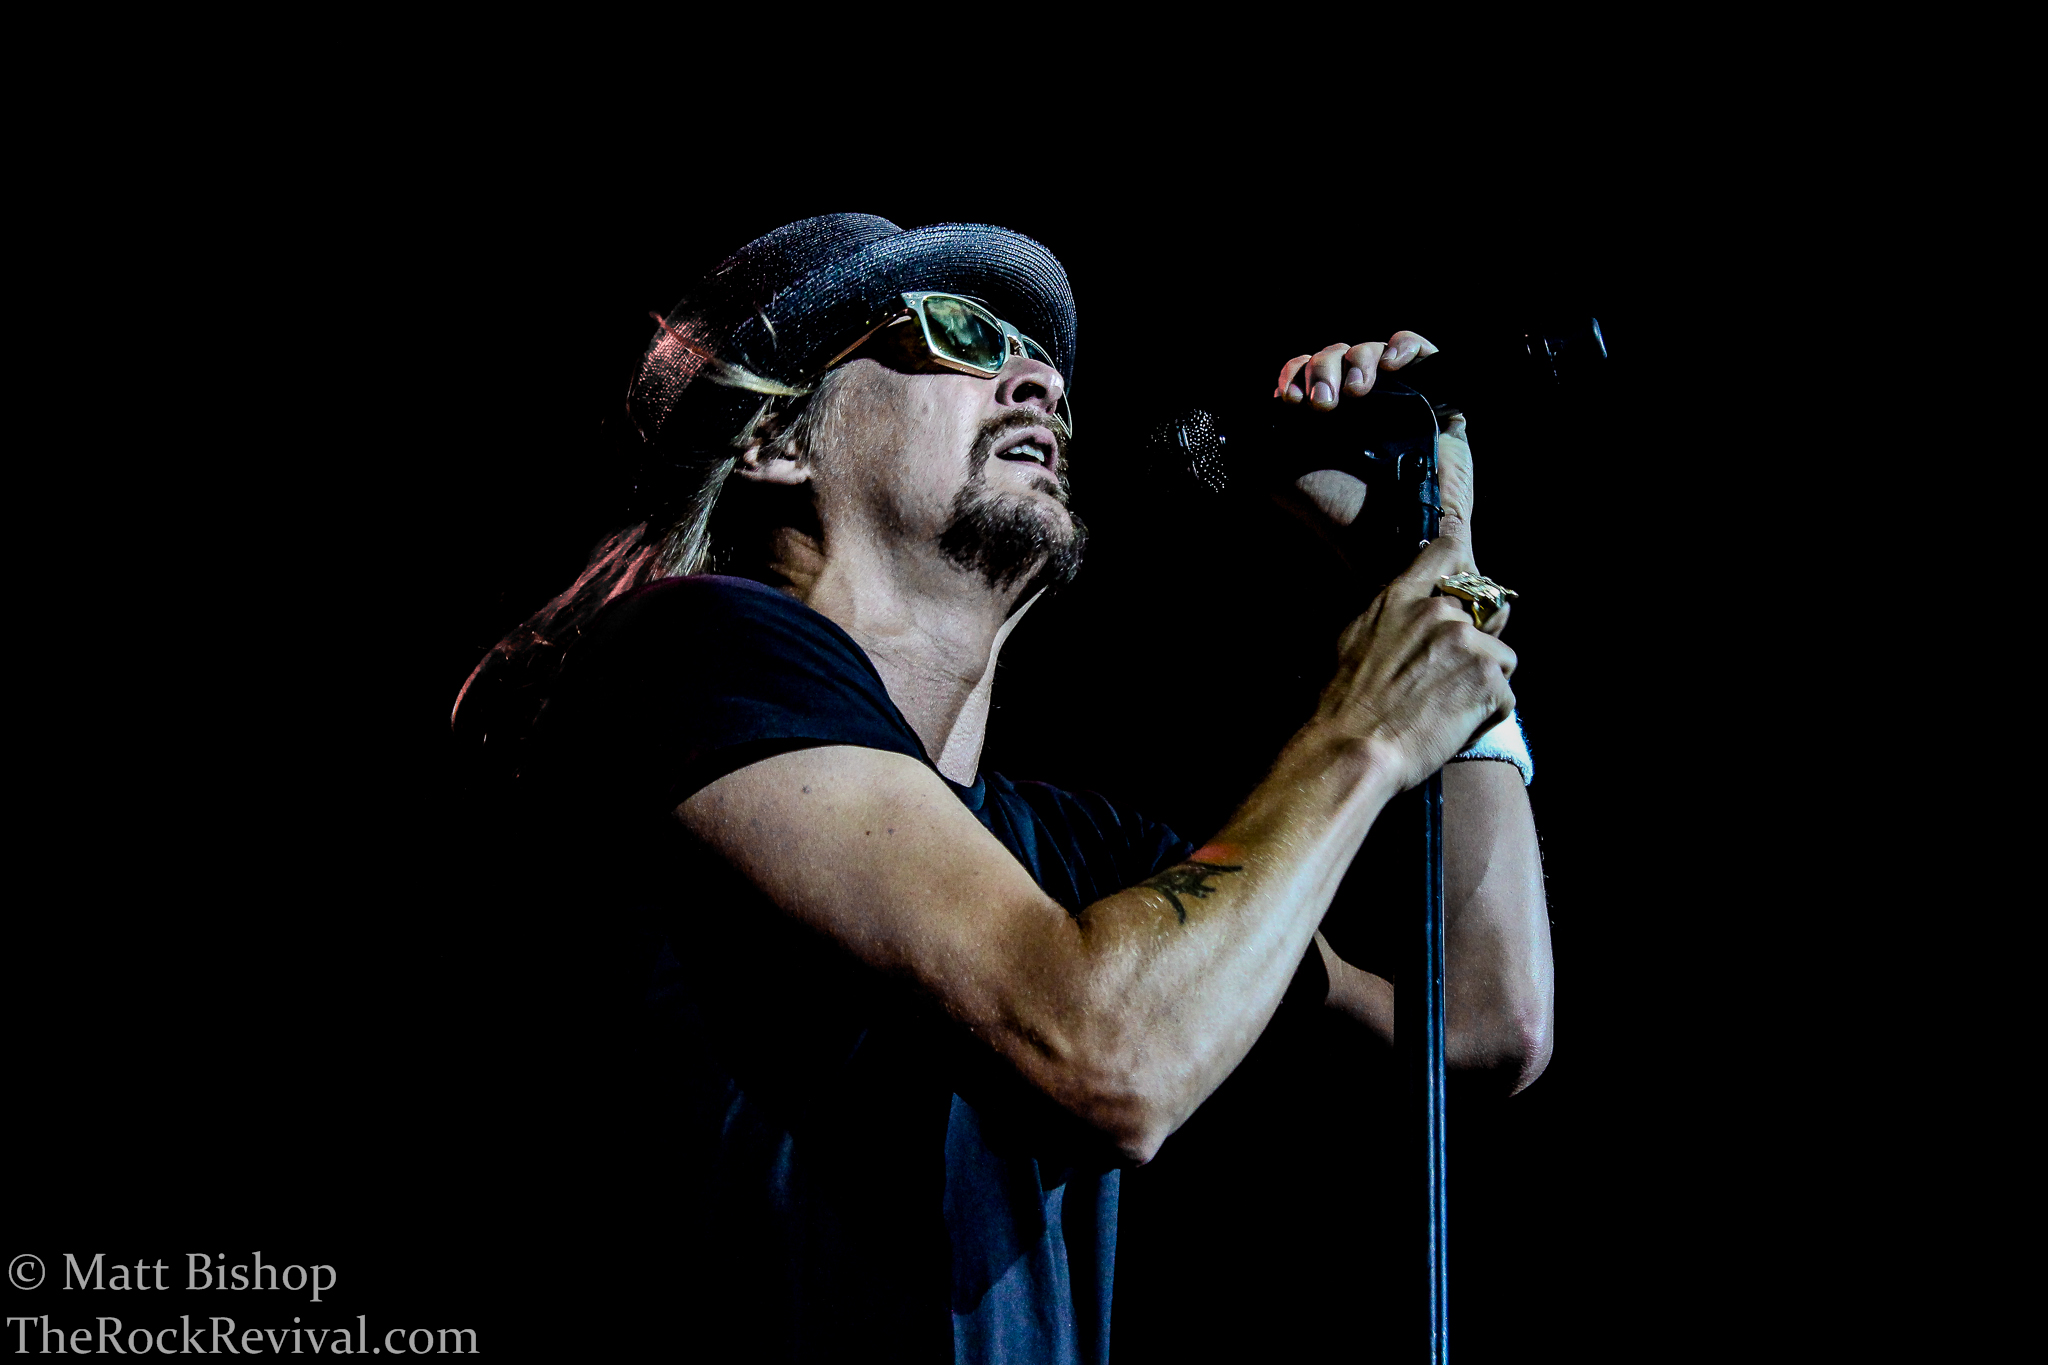 KID ROCK ANNOUNCES NEW ALBUM ‘FIRST KISS’ SET FOR RELEASE IN 2015